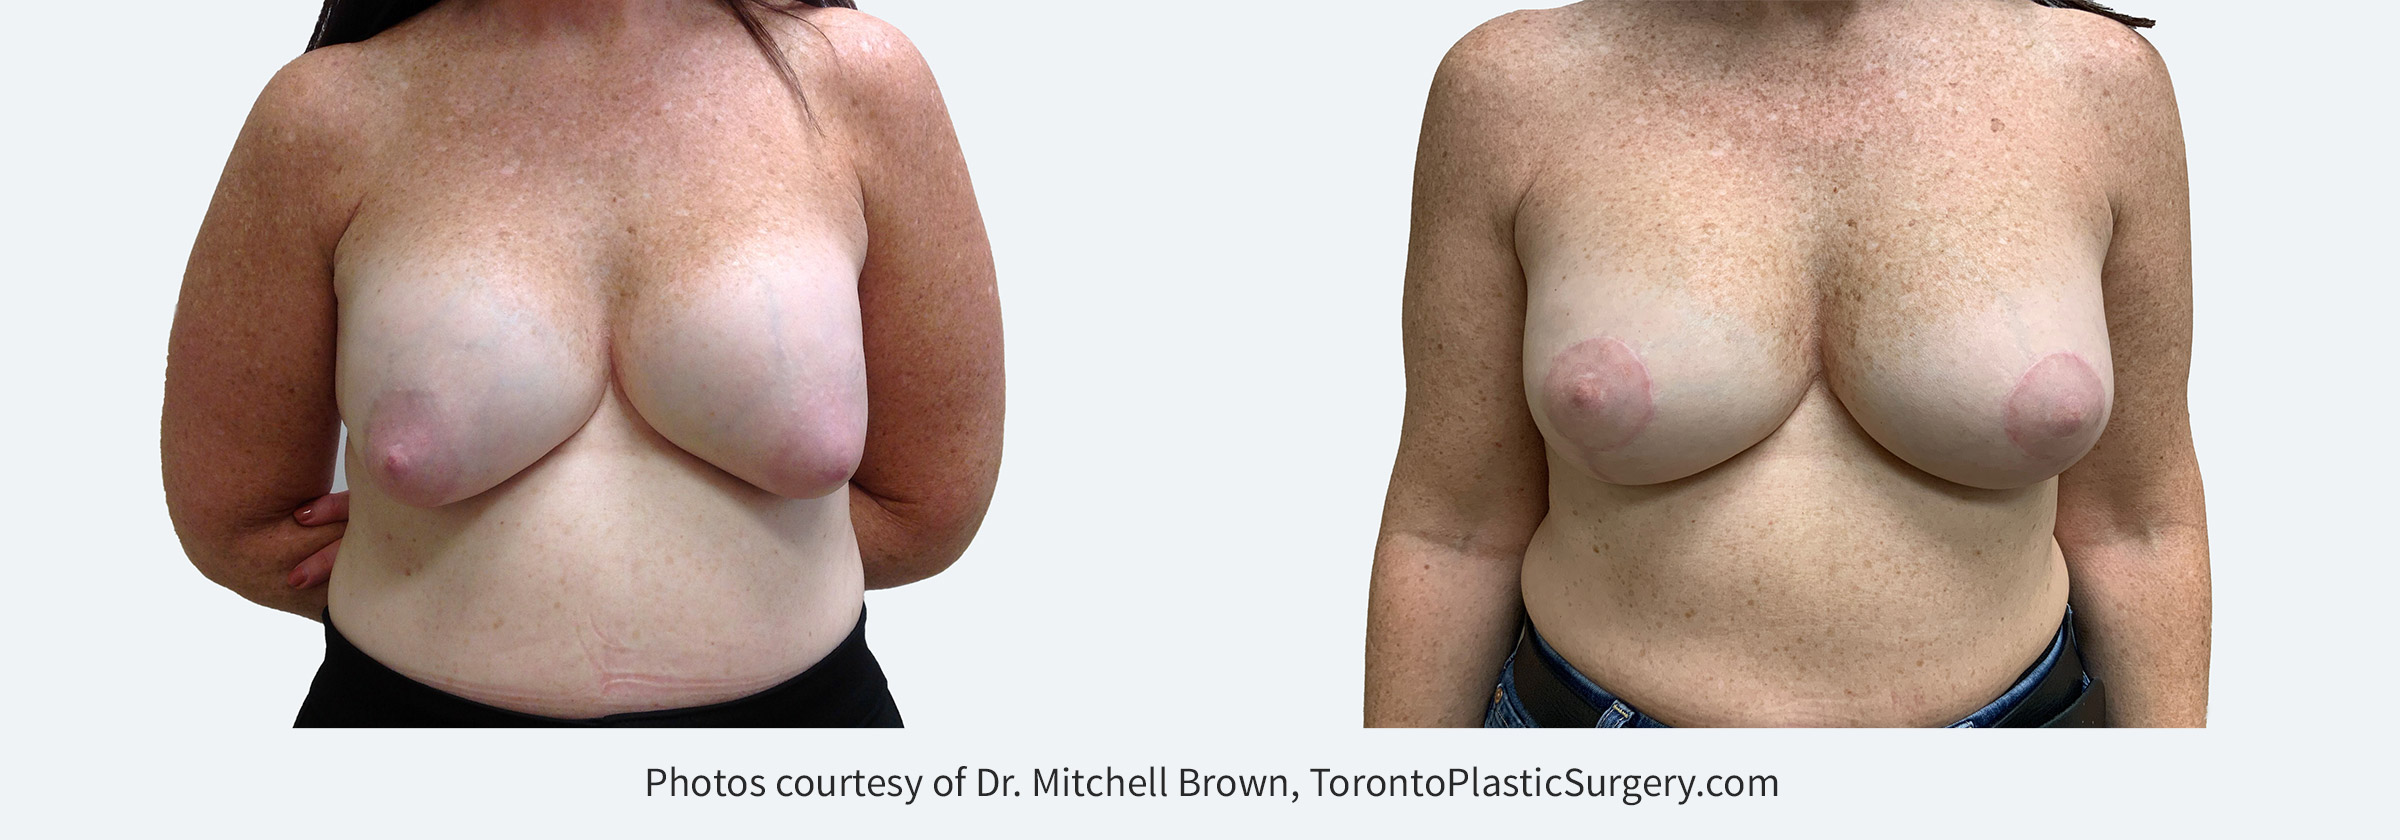 Capsular Contracture corrected with implant removal, scar tissue removal, replacement of new silicone gel 310cc implants above the pectoral muscle and breast lift. Before and 6 months after.